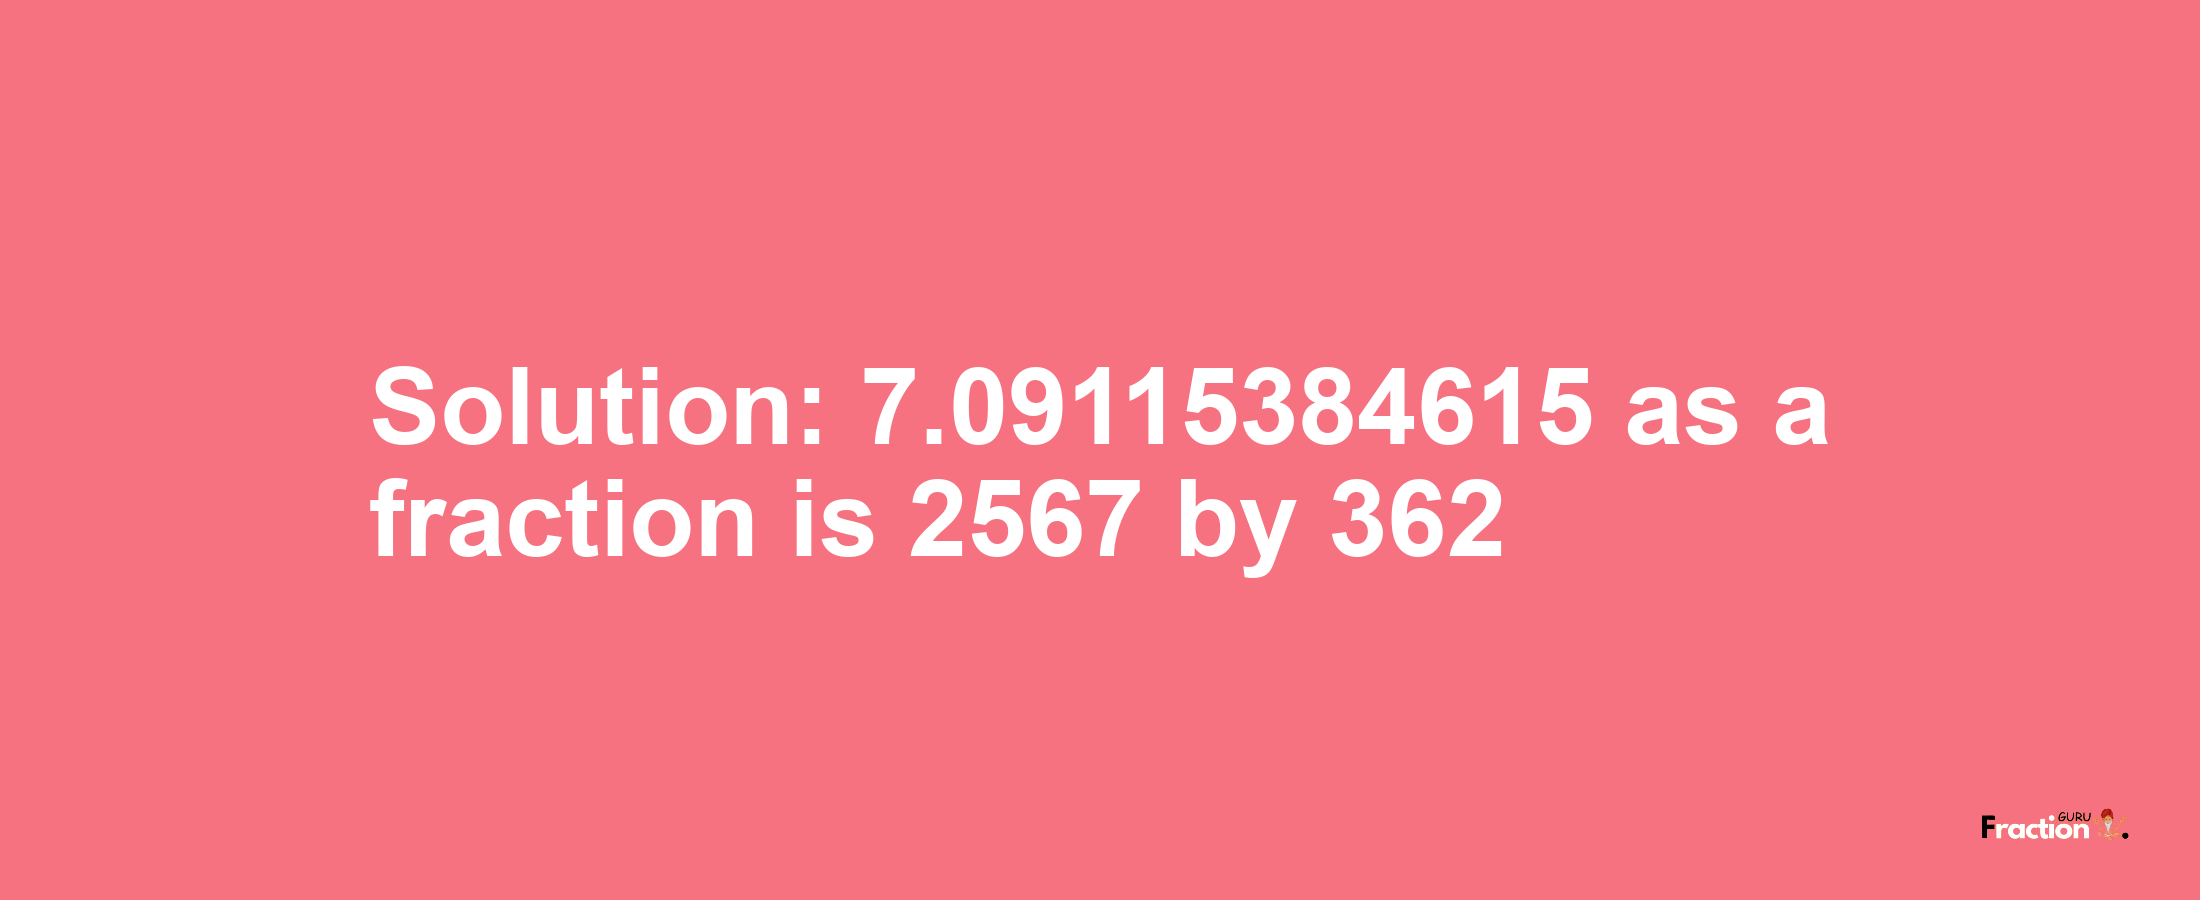 Solution:7.09115384615 as a fraction is 2567/362